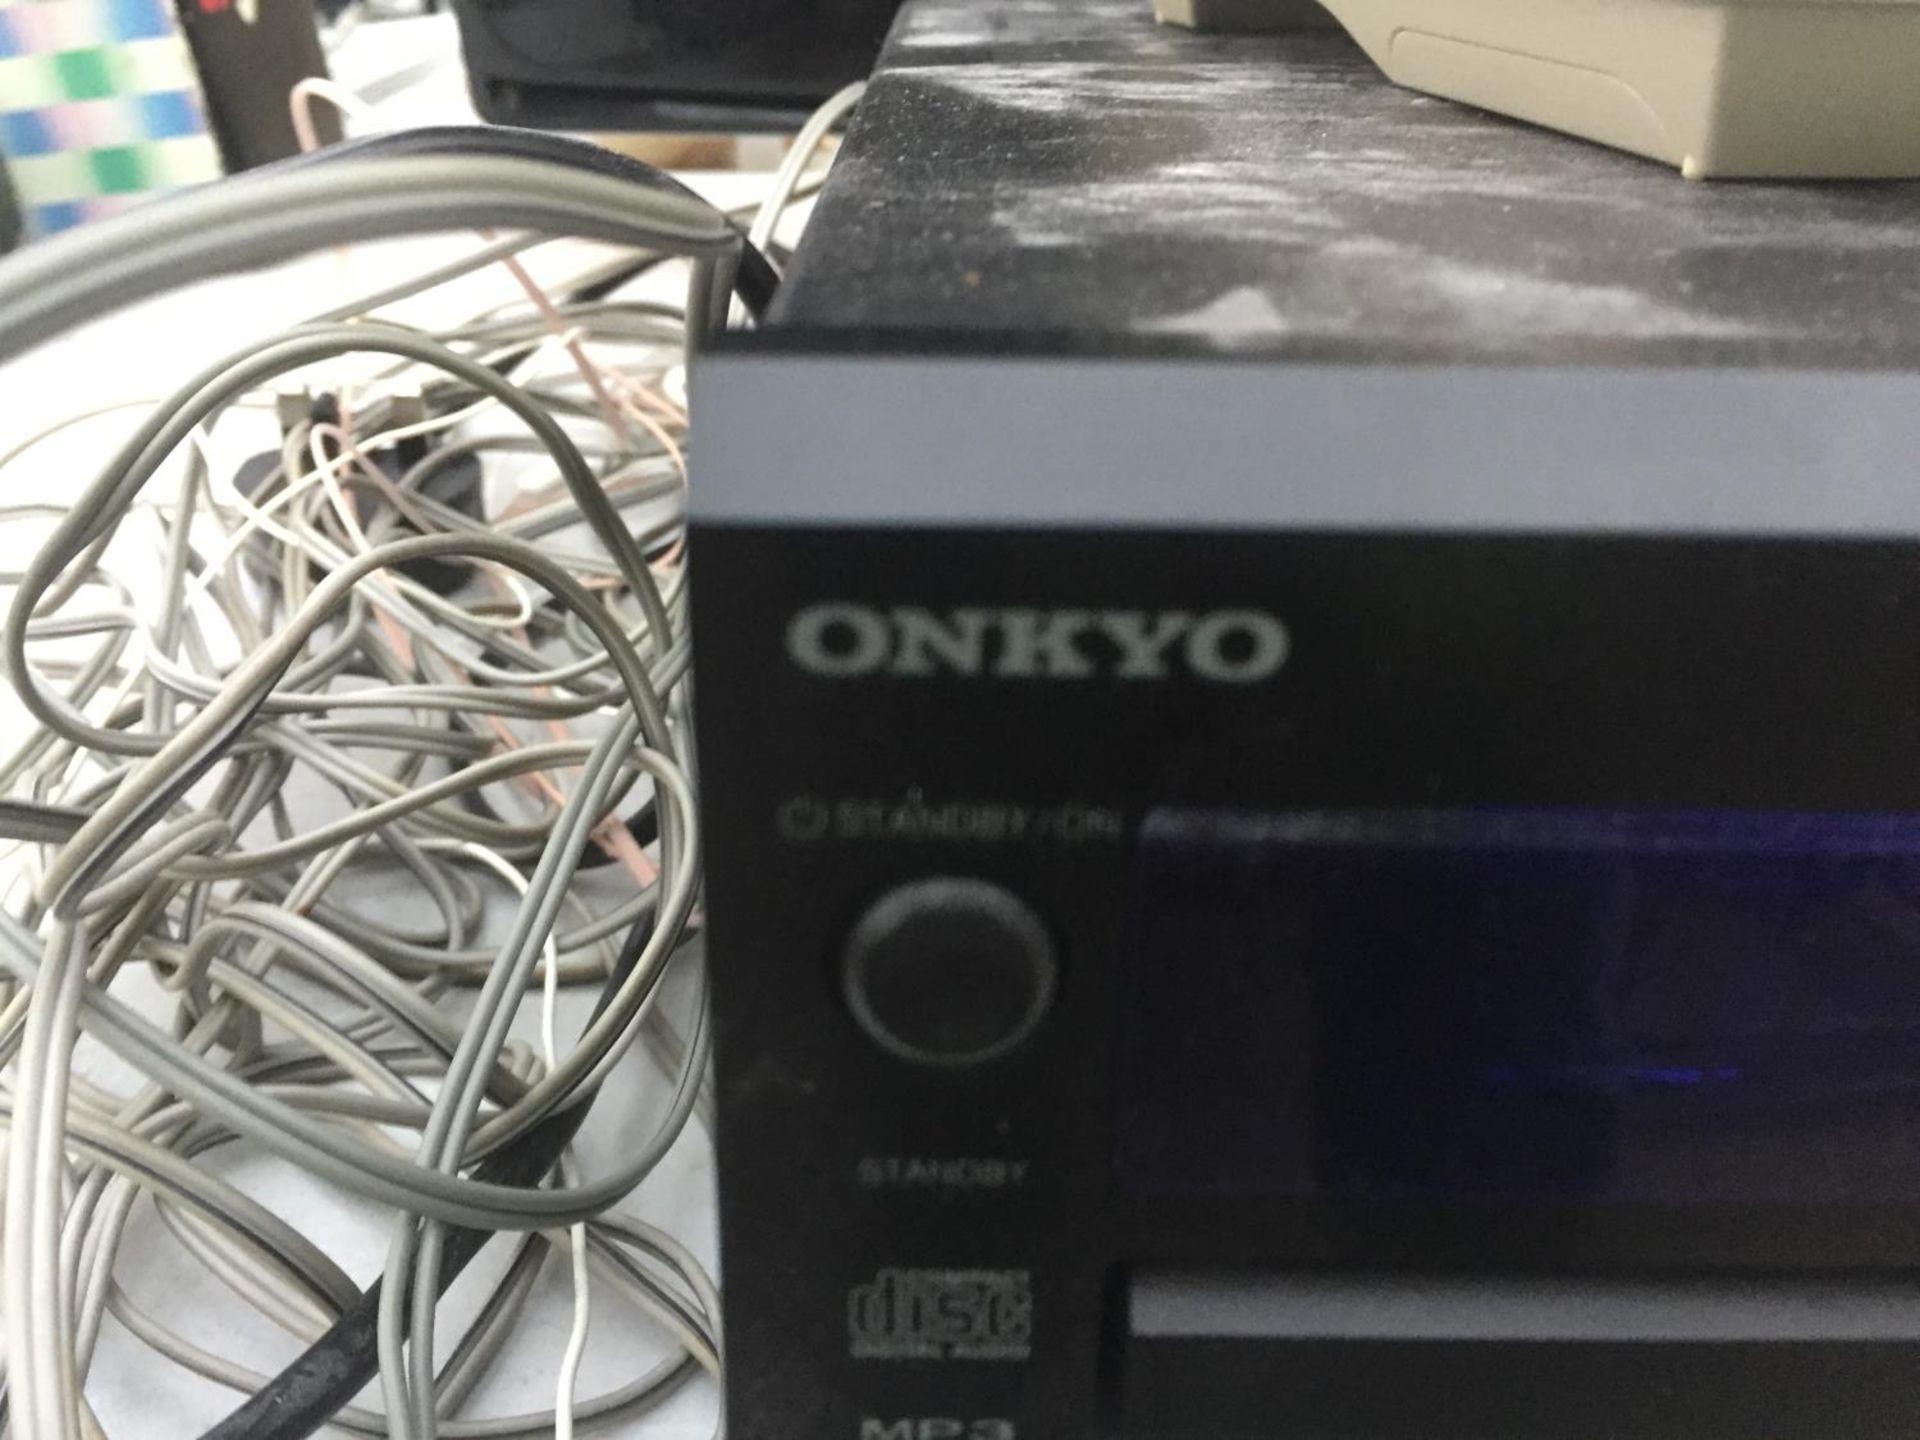 AN ONKYO CD PLAYER WITH TWO SPEAKERS, AND FOUR HOUSE PHONES - Image 5 of 6